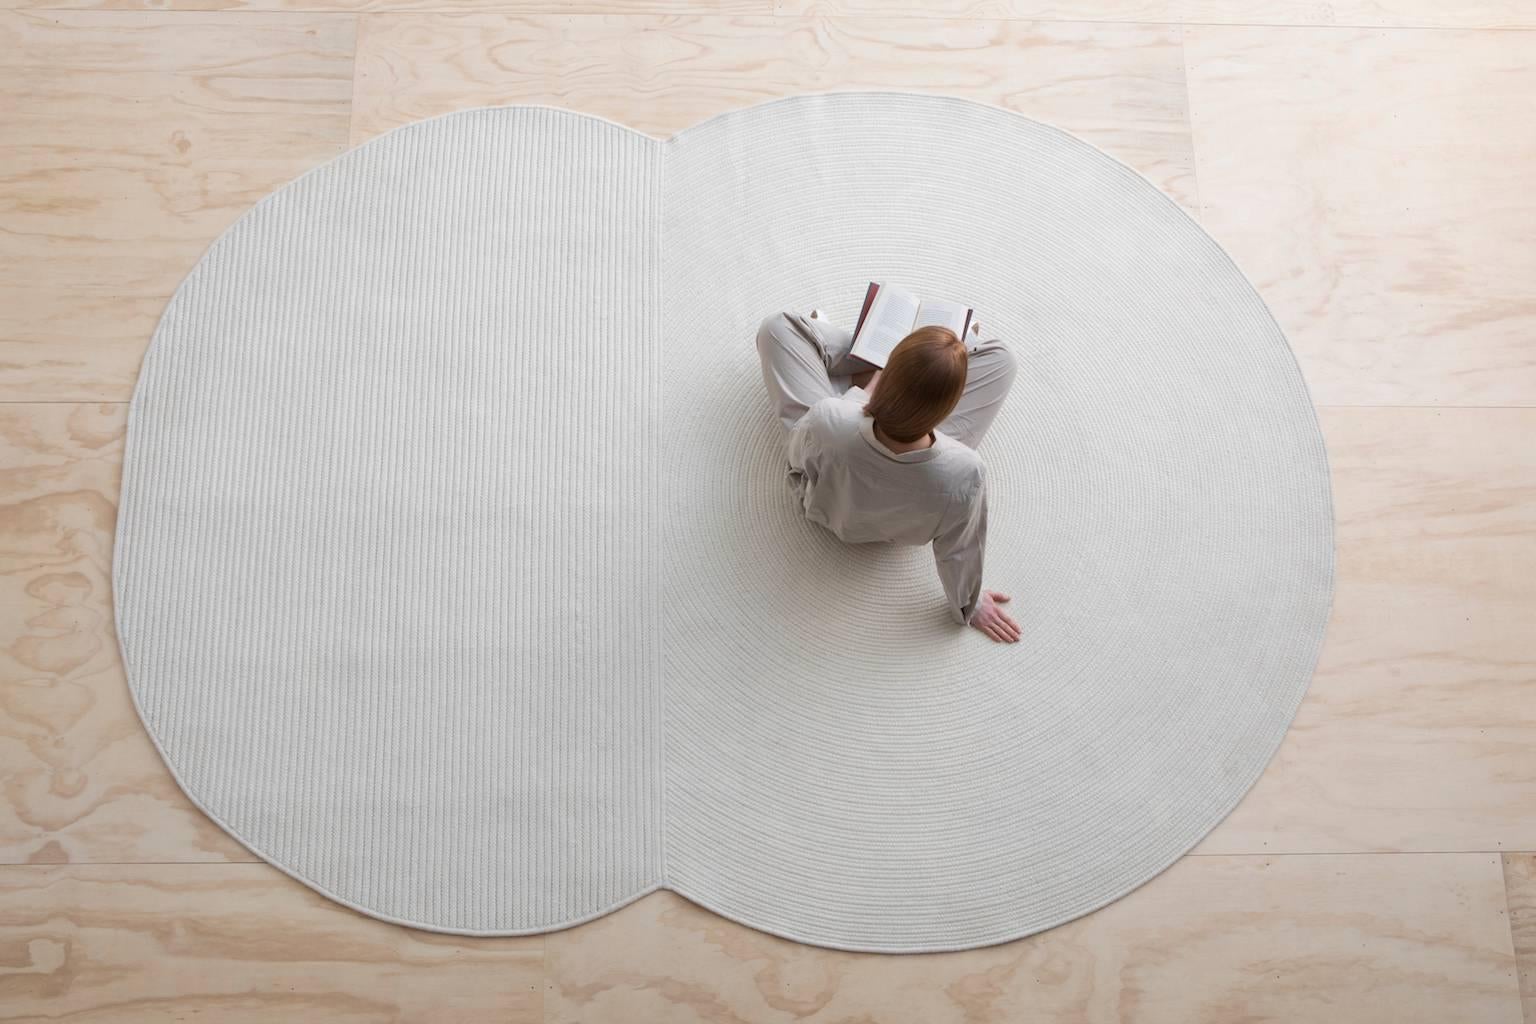 A braided wool rug composed of a simple circle and oval shape bound together. Each shape explores a subtle contrast in braiding technique with the circle made of a flat braid coil and the oval made of cable lock braided rows with a contrasting zig